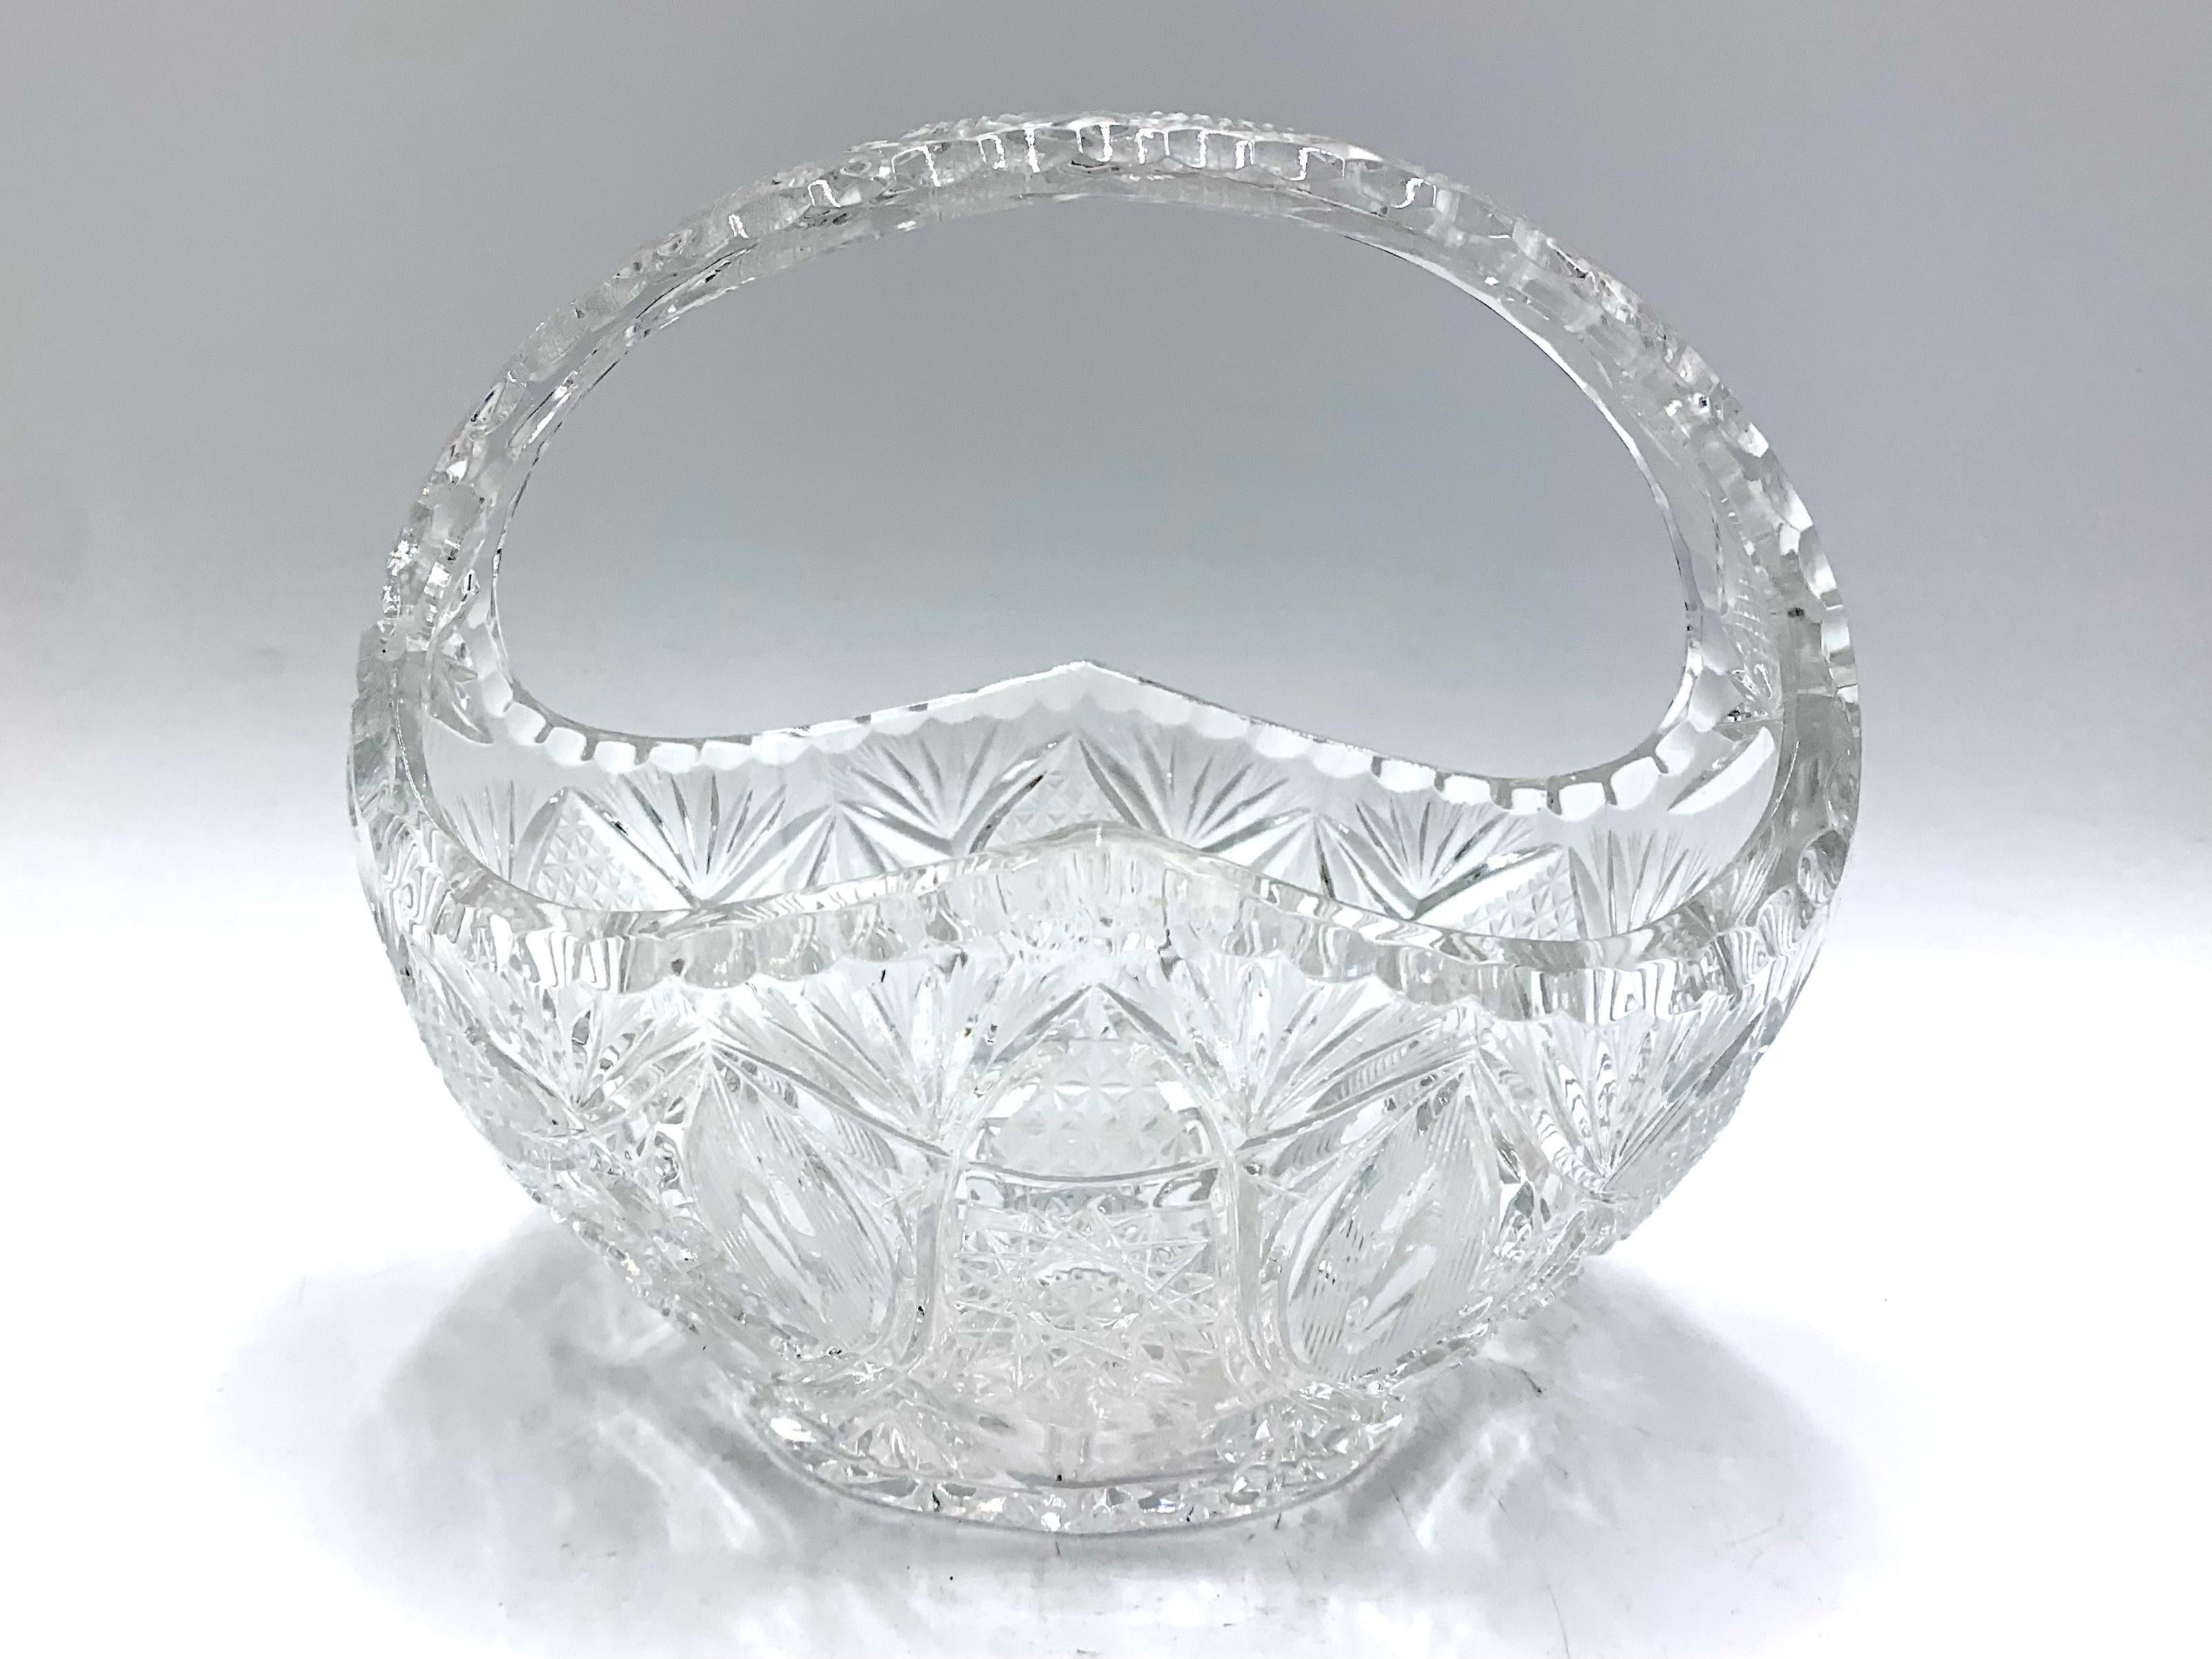 Big clear crystal decorative basket - a bowl 
For sweets or fruits.
Very good condition, very heavy. 
No damage.